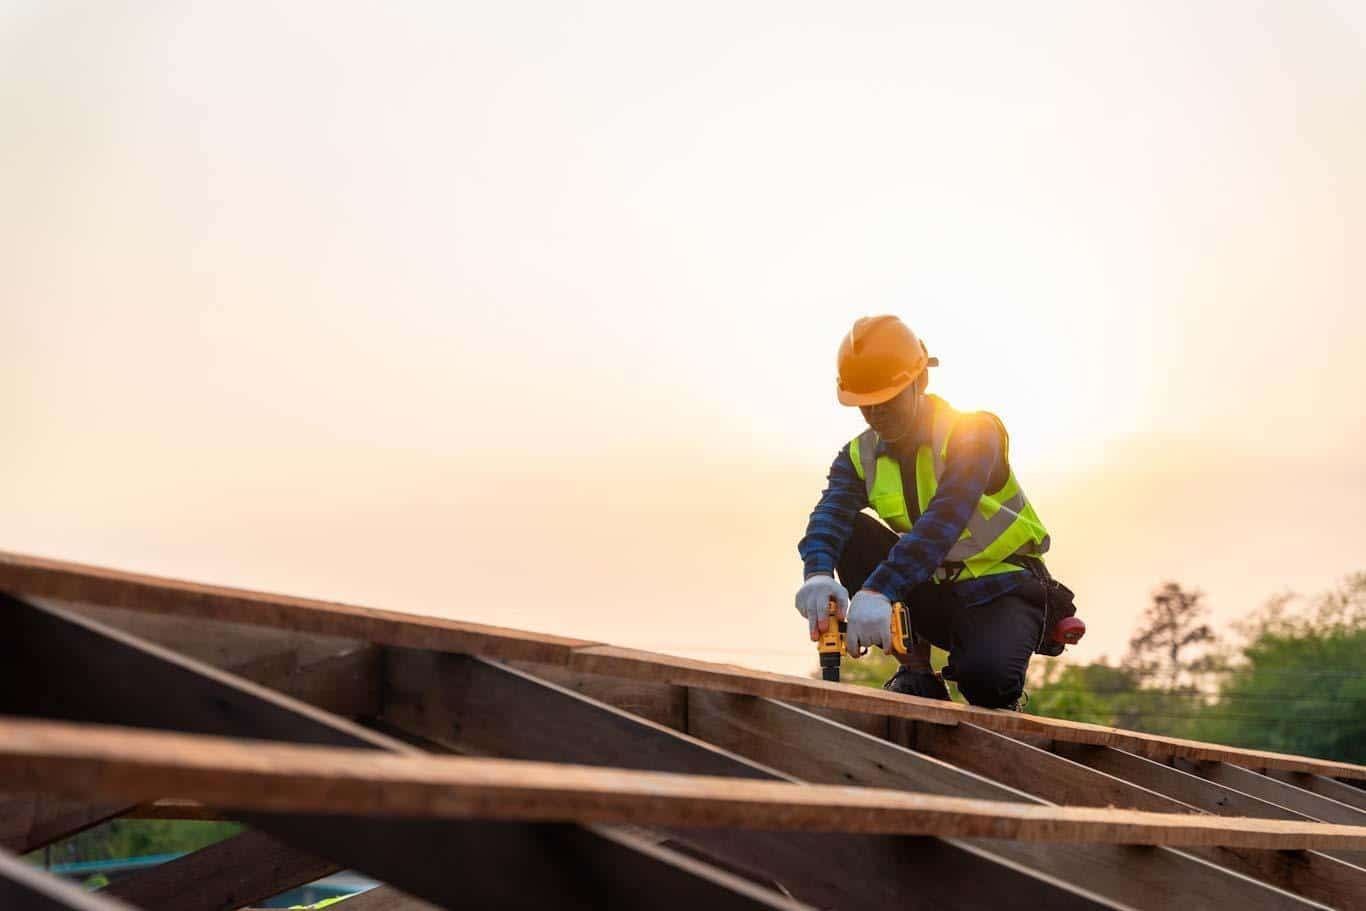 Rooftop safety is vital for all working at heights situations.